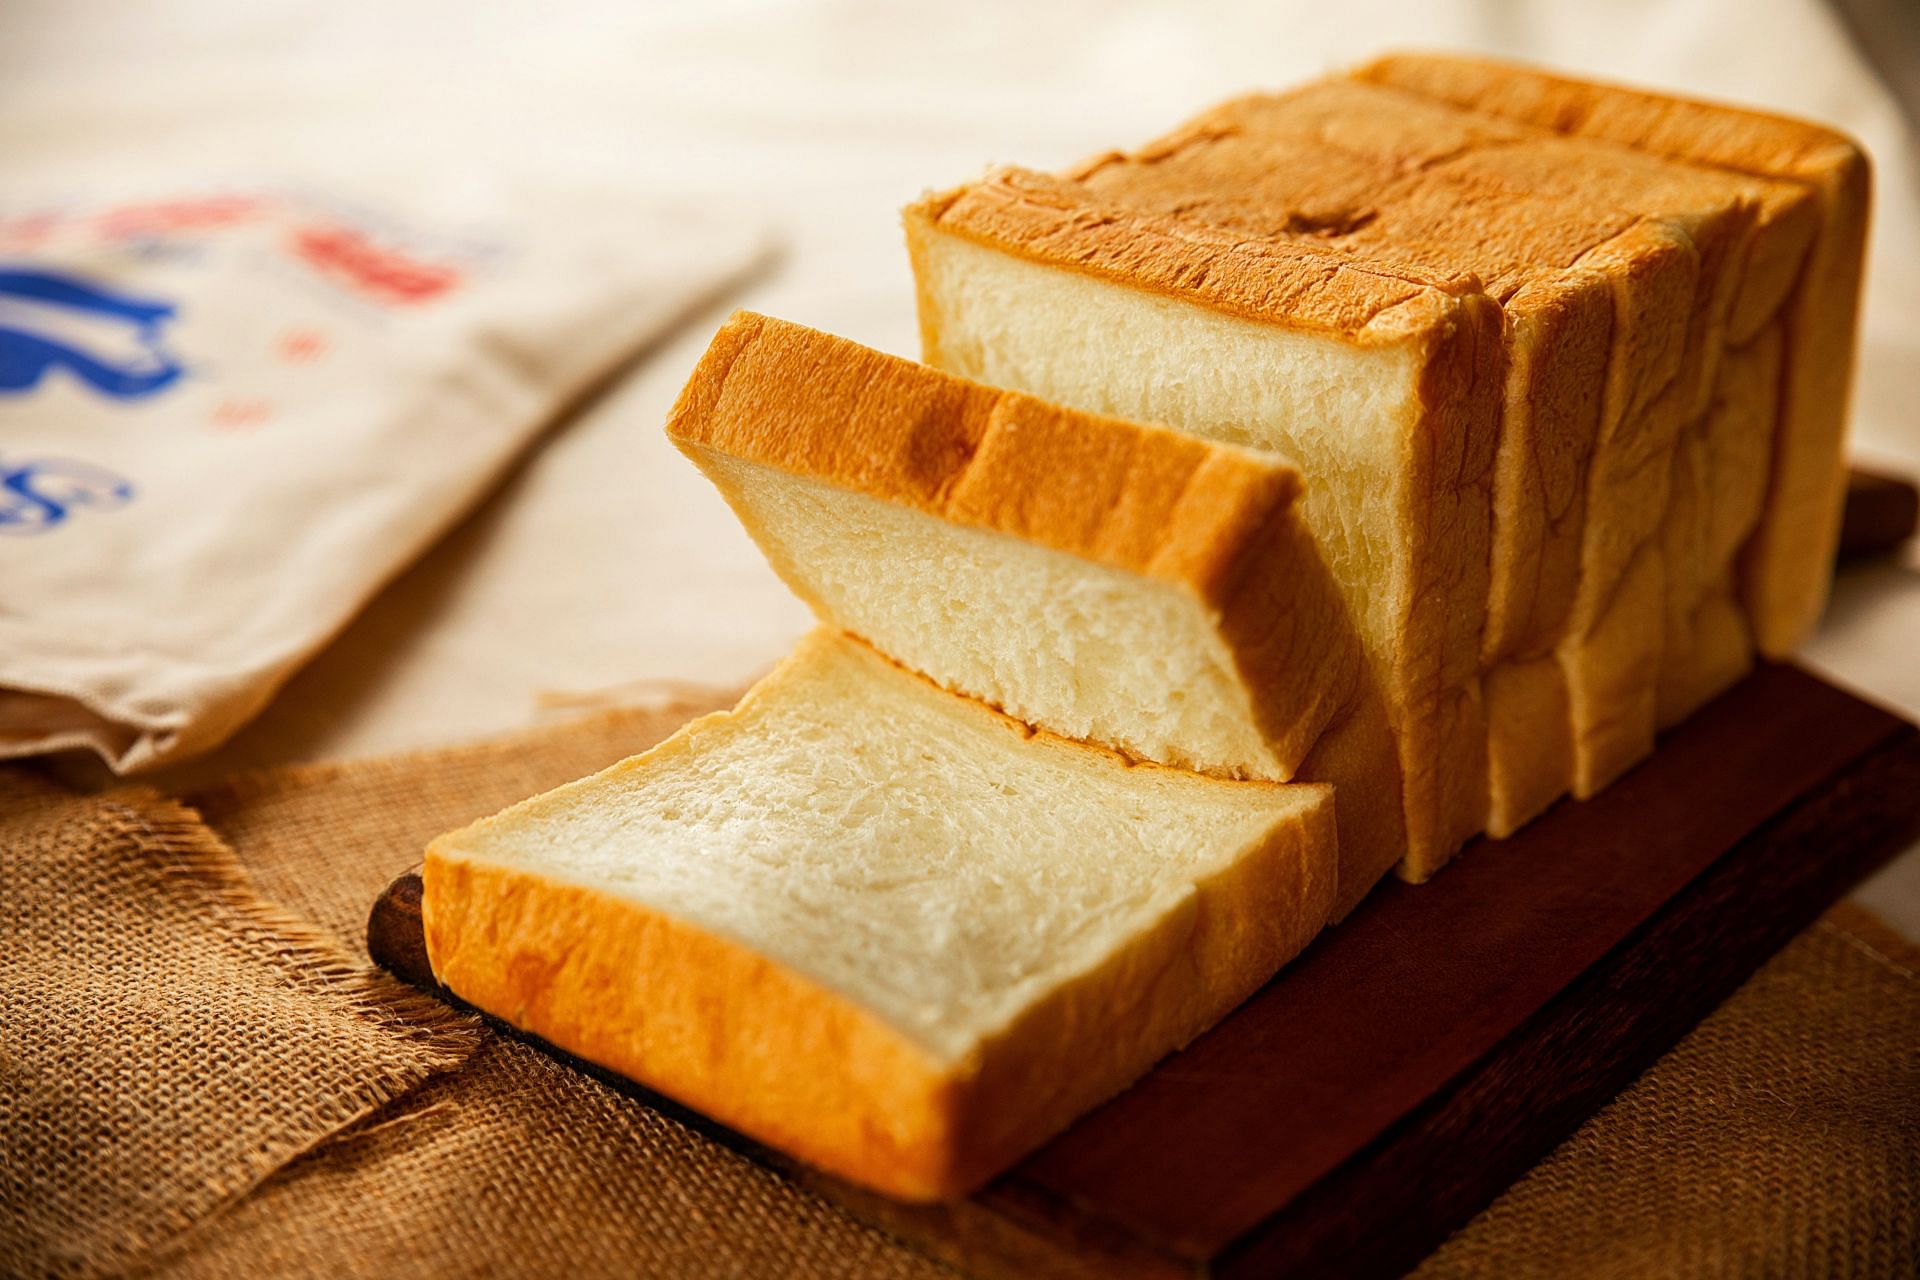 White bread is a great low fiber option before colonoscopy. (Image via Unsplash/Charles Chen)